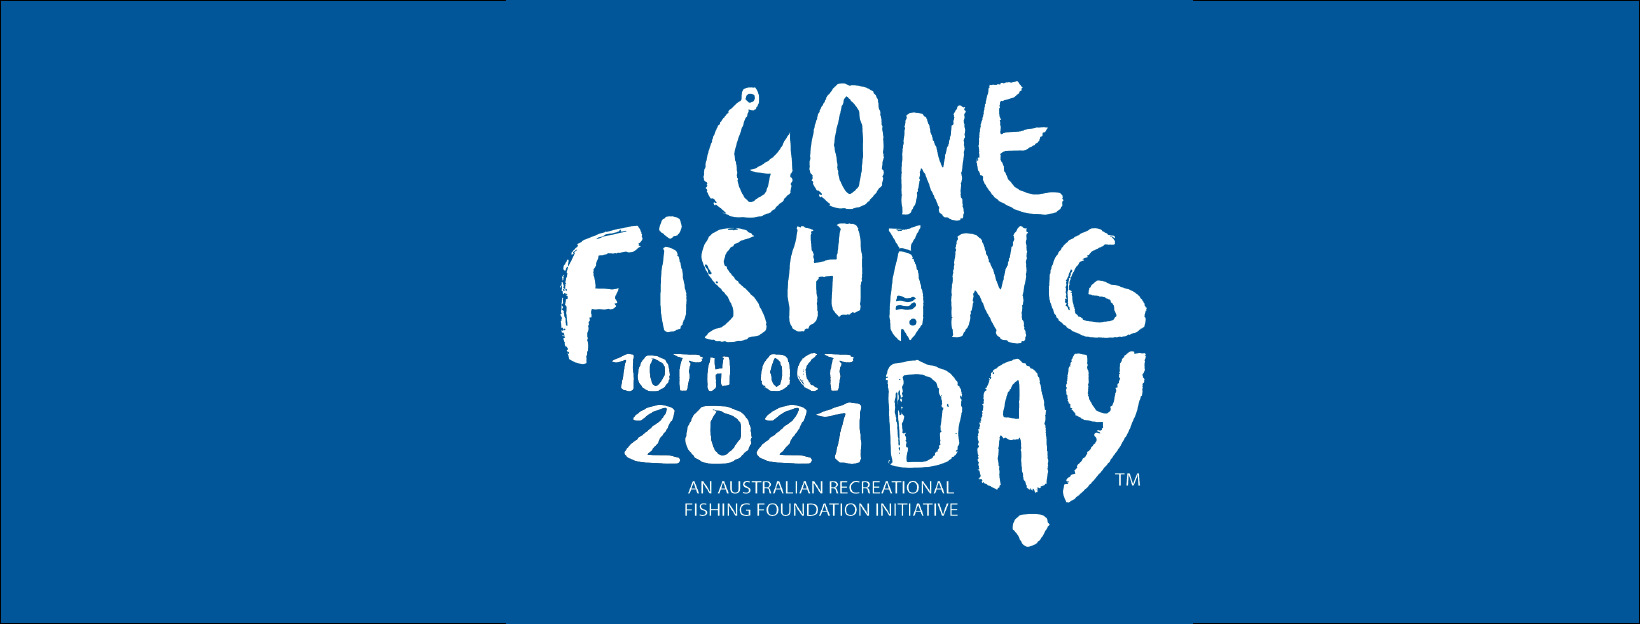 GET READY TO FISH FOR YOUR MENTAL HEALTH AUSTRALIA!